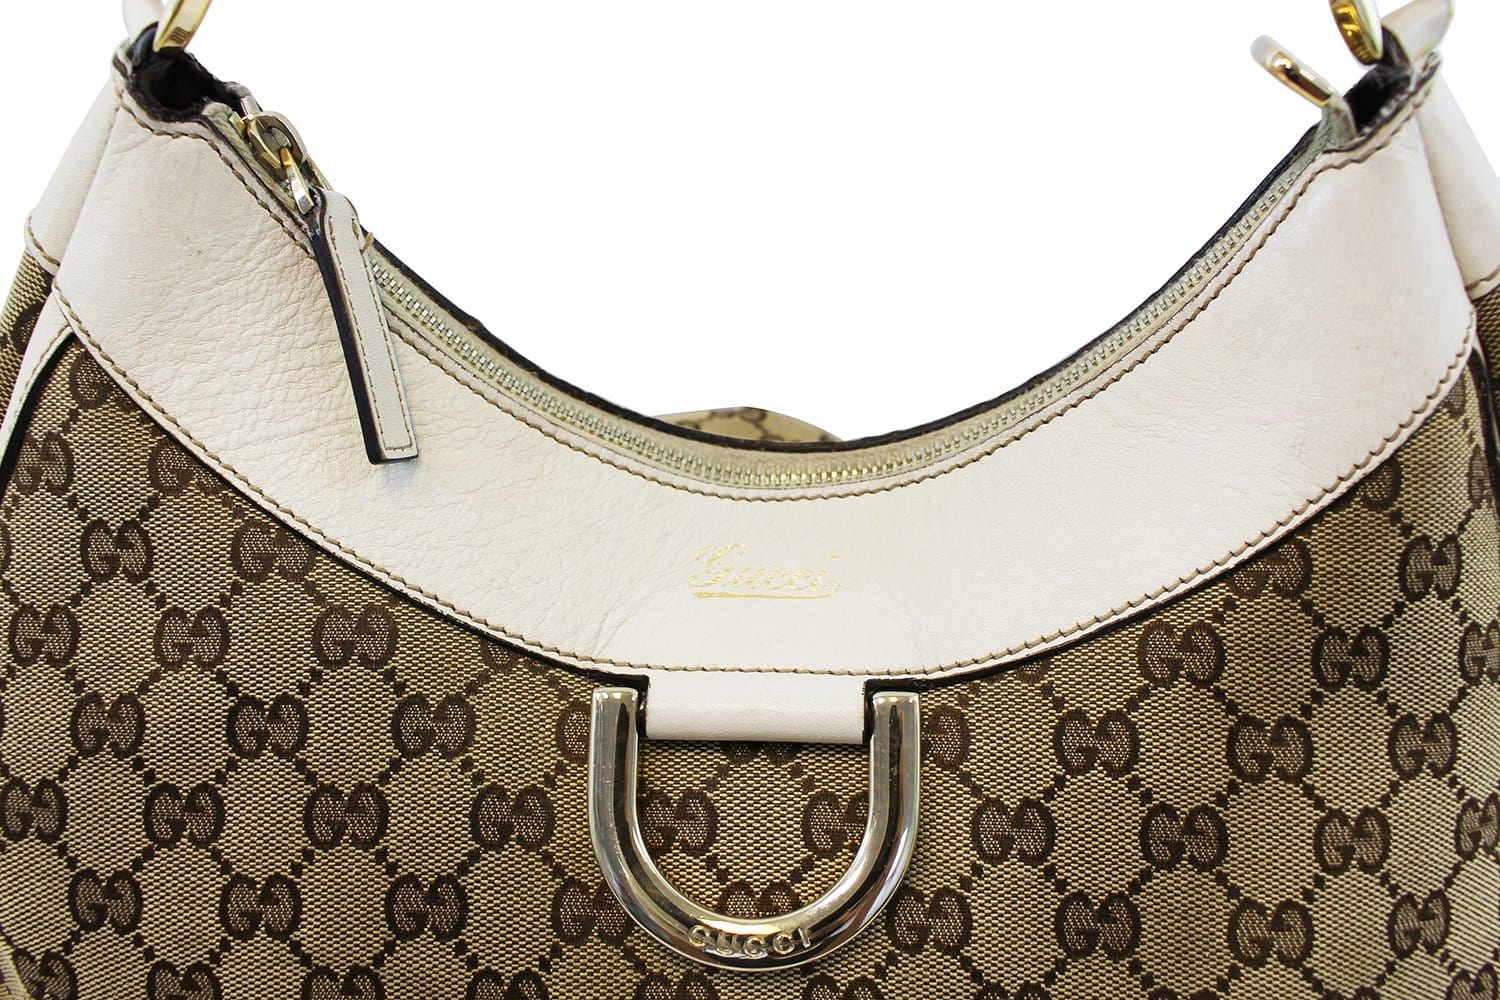 Gucci Beige/Gold GG Canvas and Leather Large D Ring Shoulder Bag